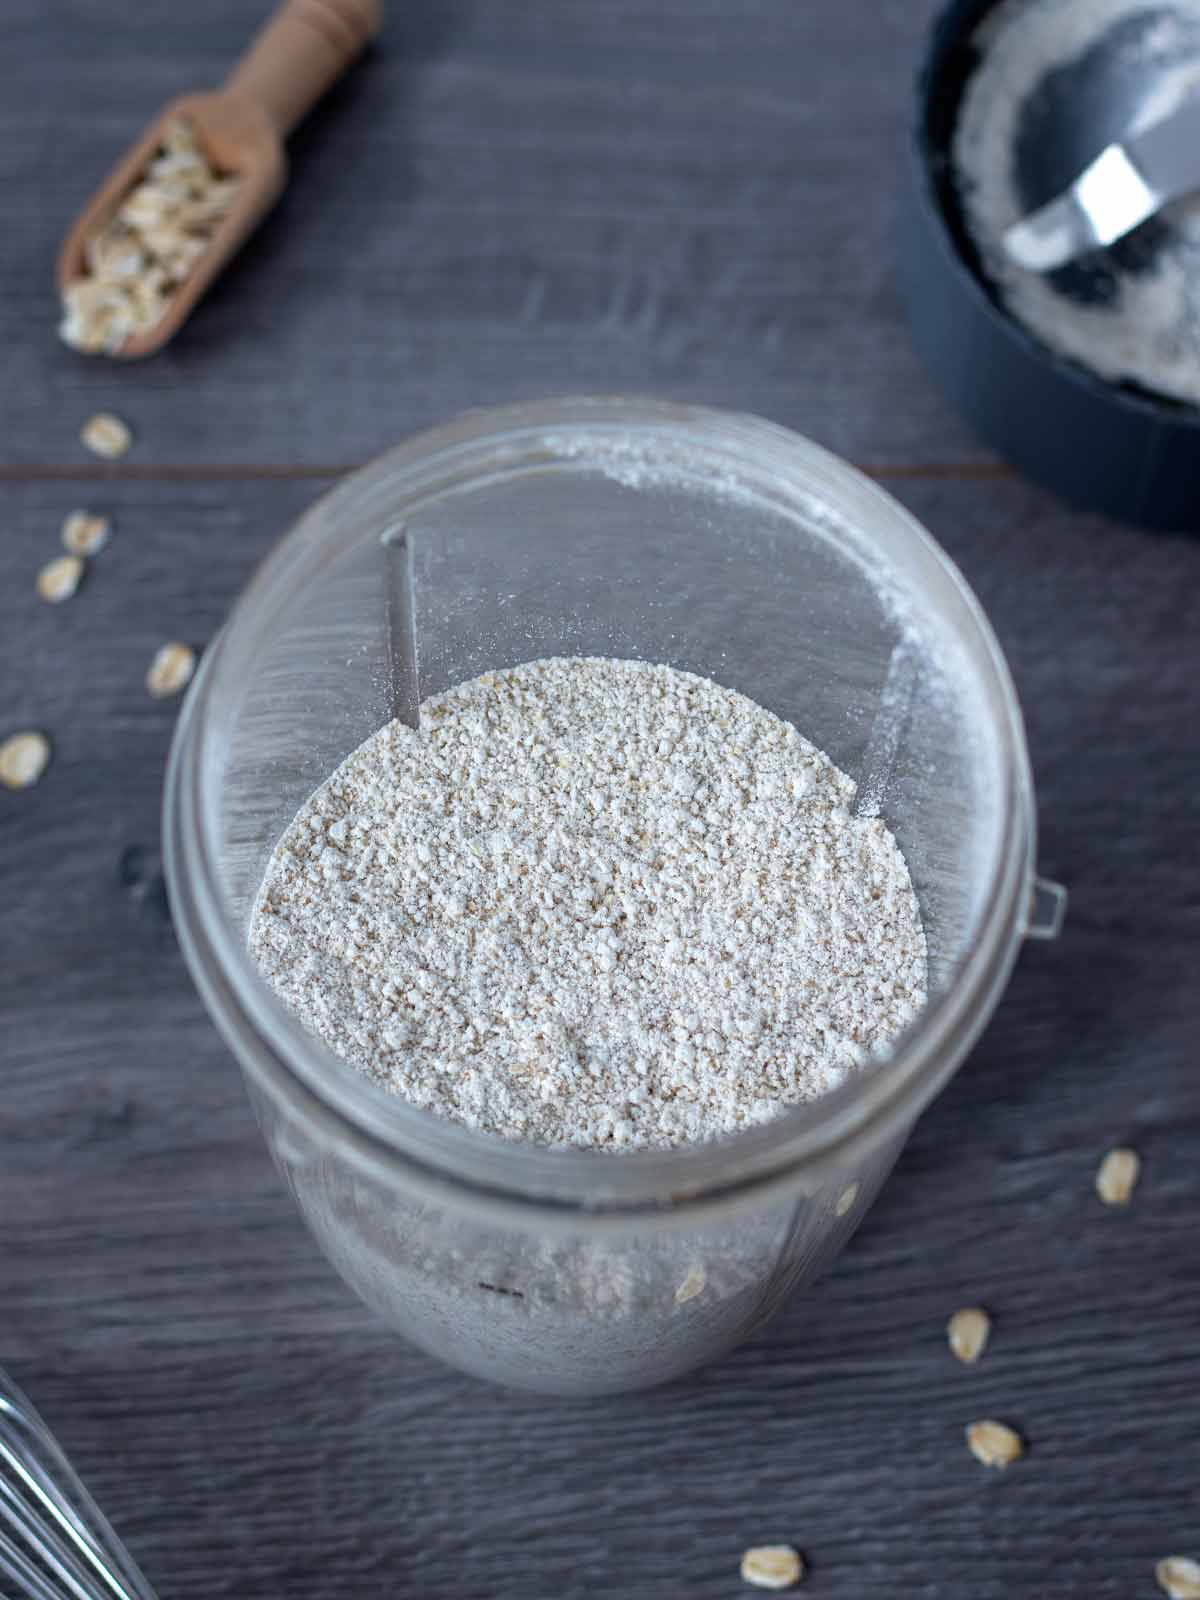 Homemade gluten-free flour made from rolled oats in a blender cup